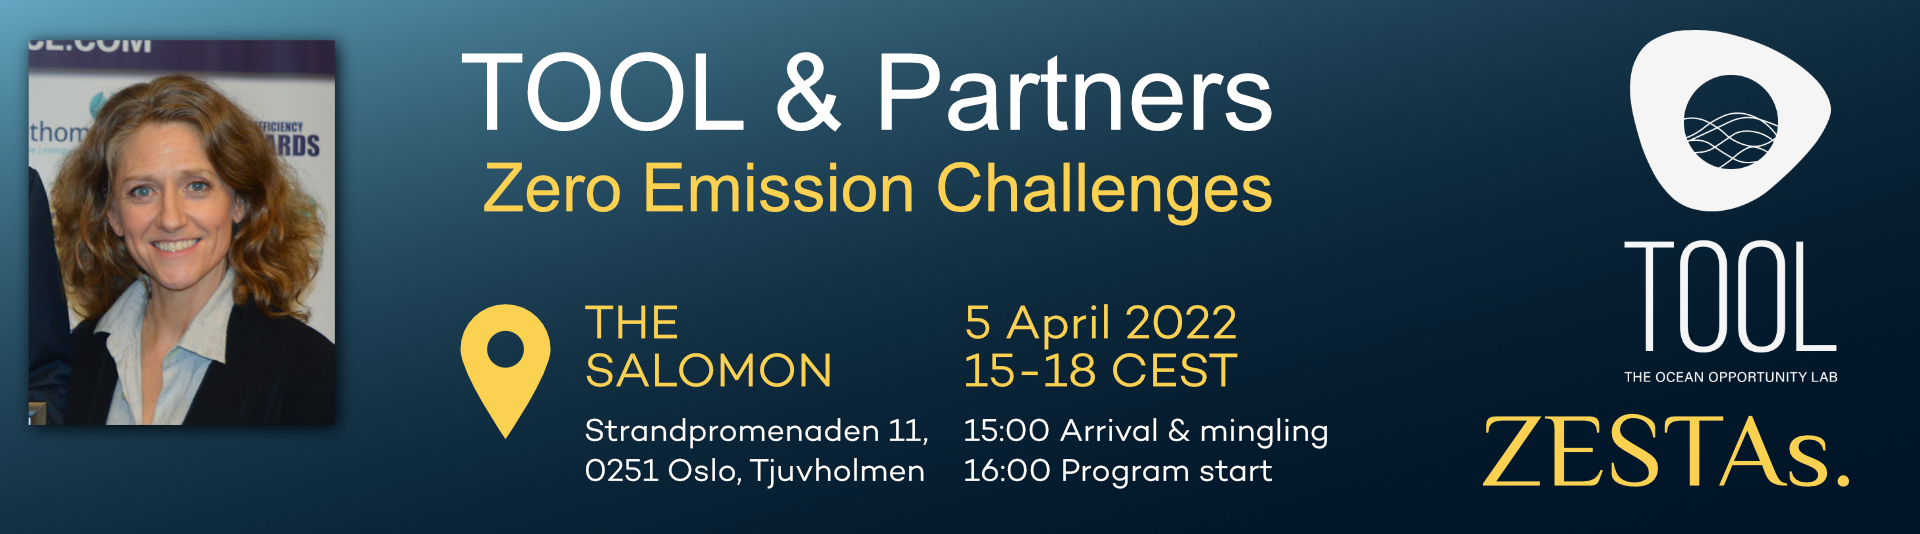 Secretary-General, Madadh MacLaine, presenting at TOOL & Partners “Zero Emission Challenges” event in Oslo